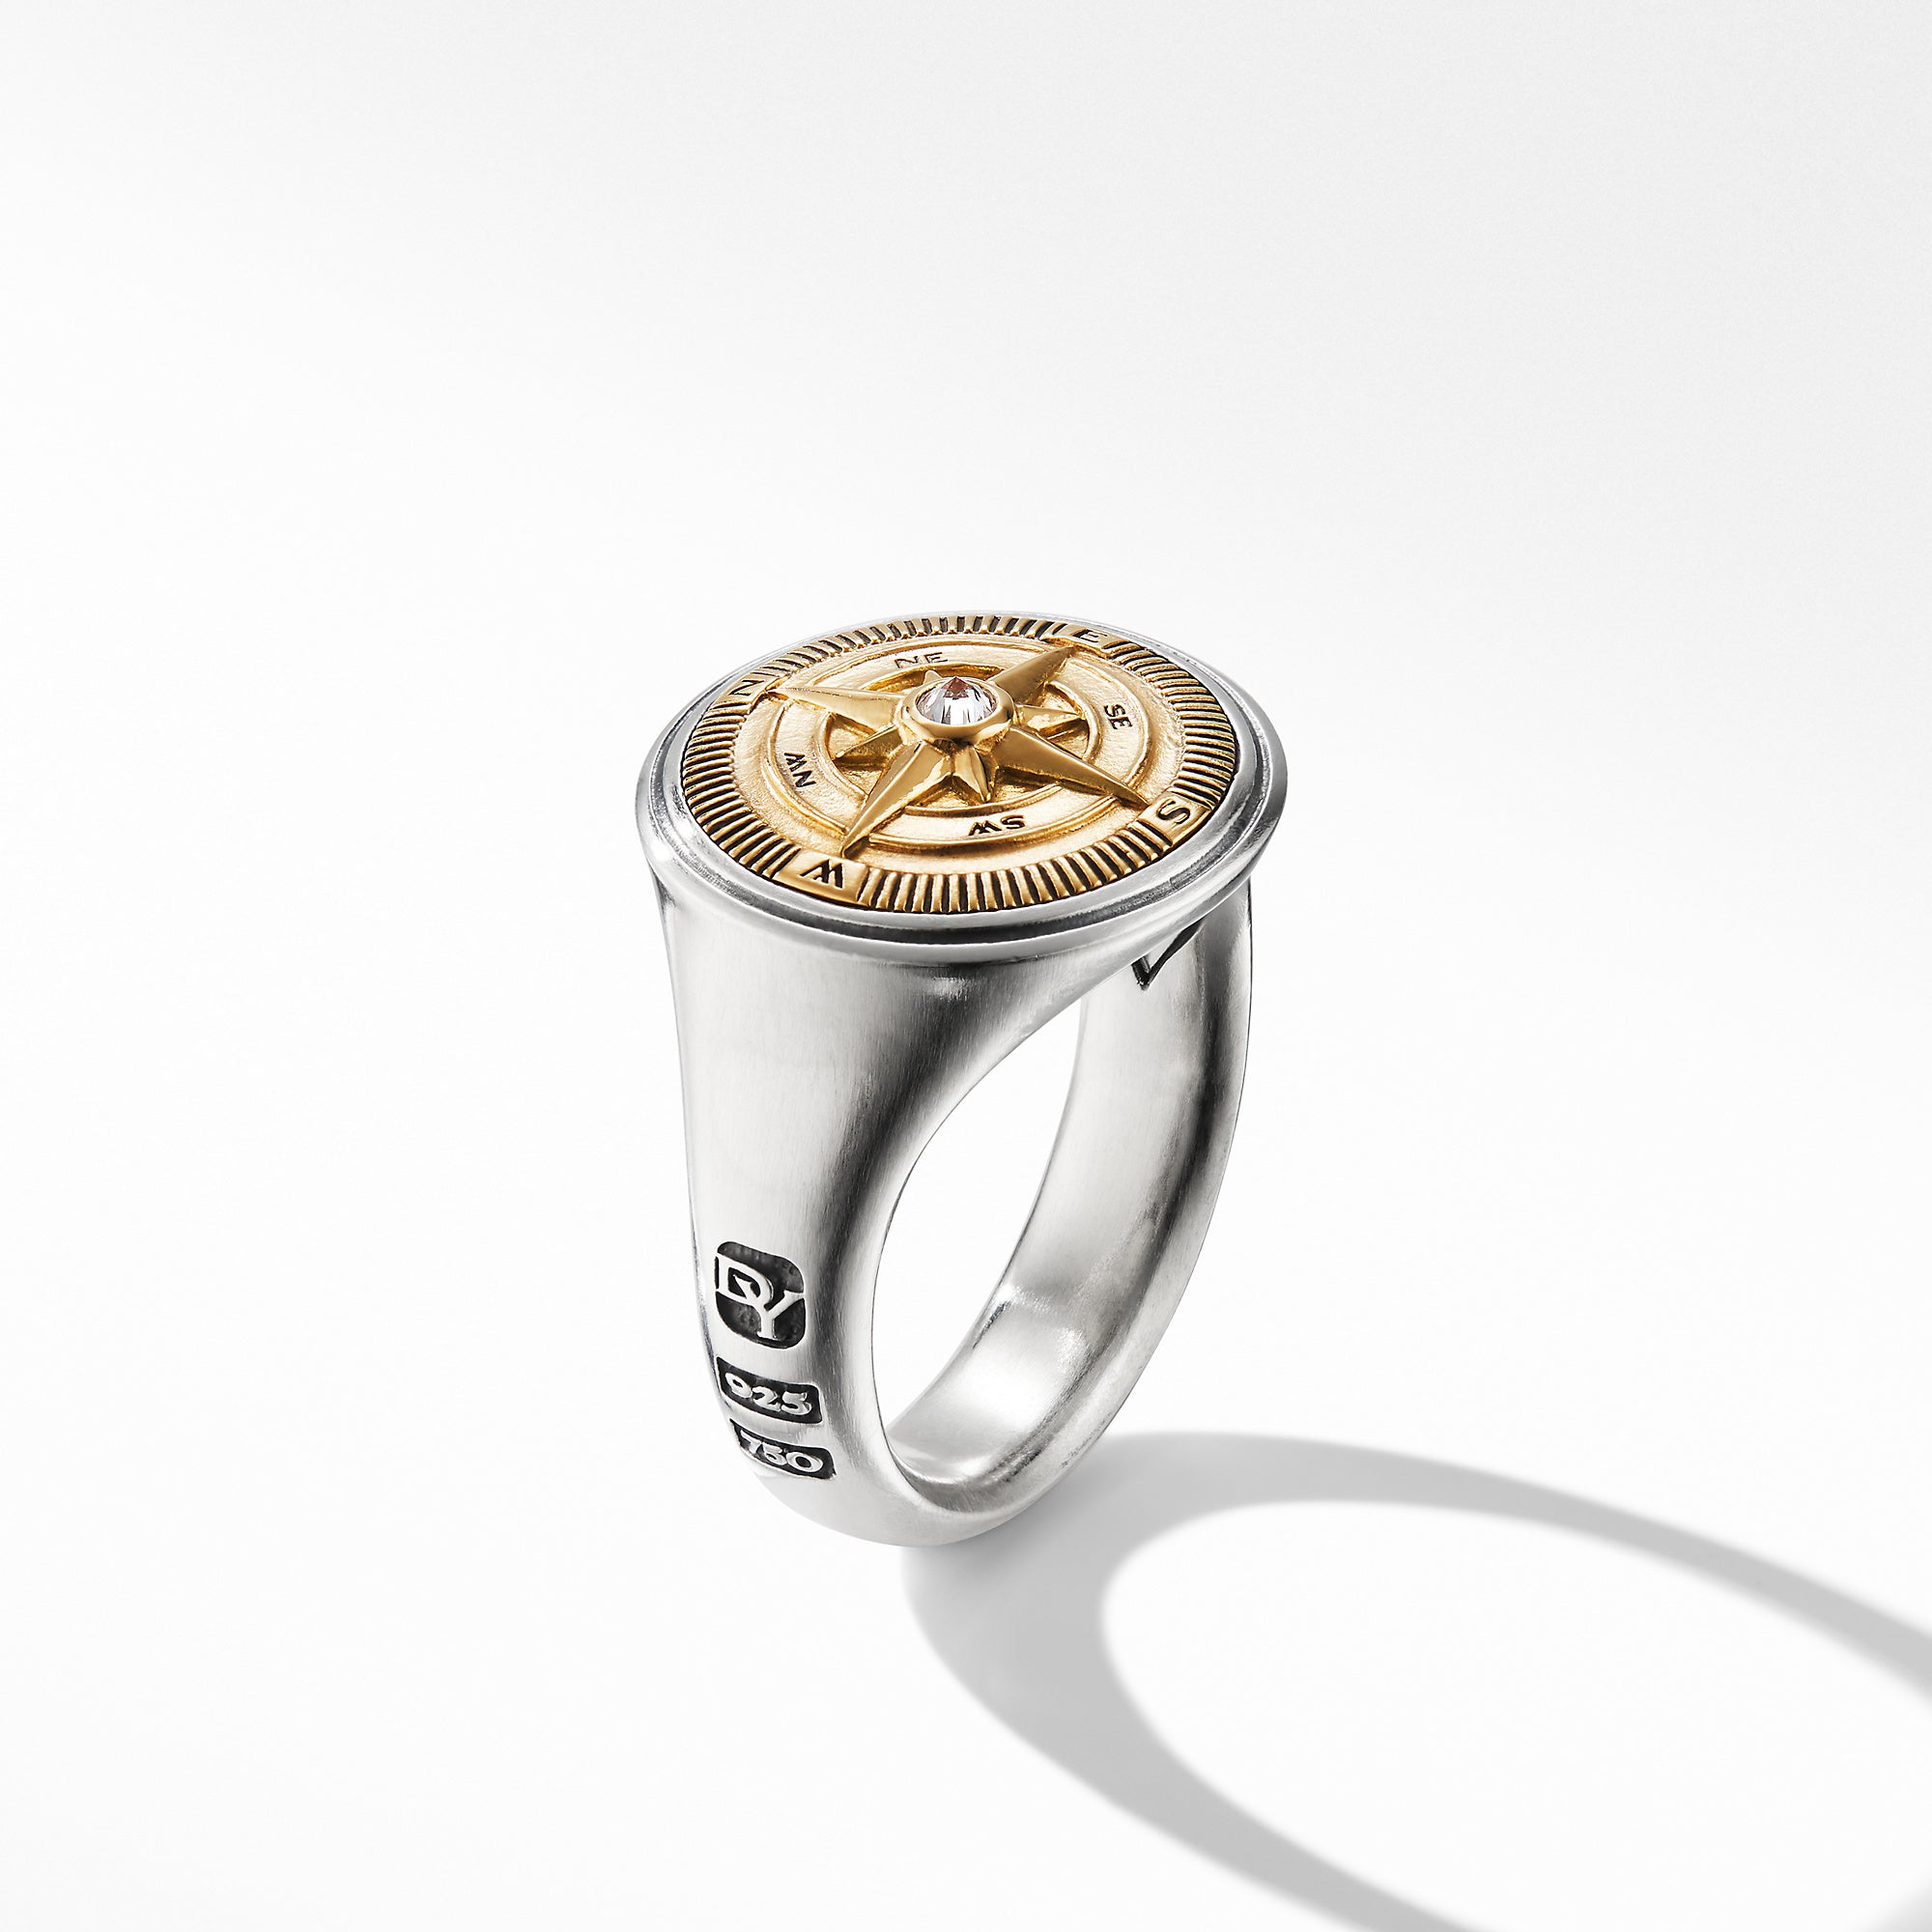 David Yurman Maritime Compass Signet Ring with 18k Gold and